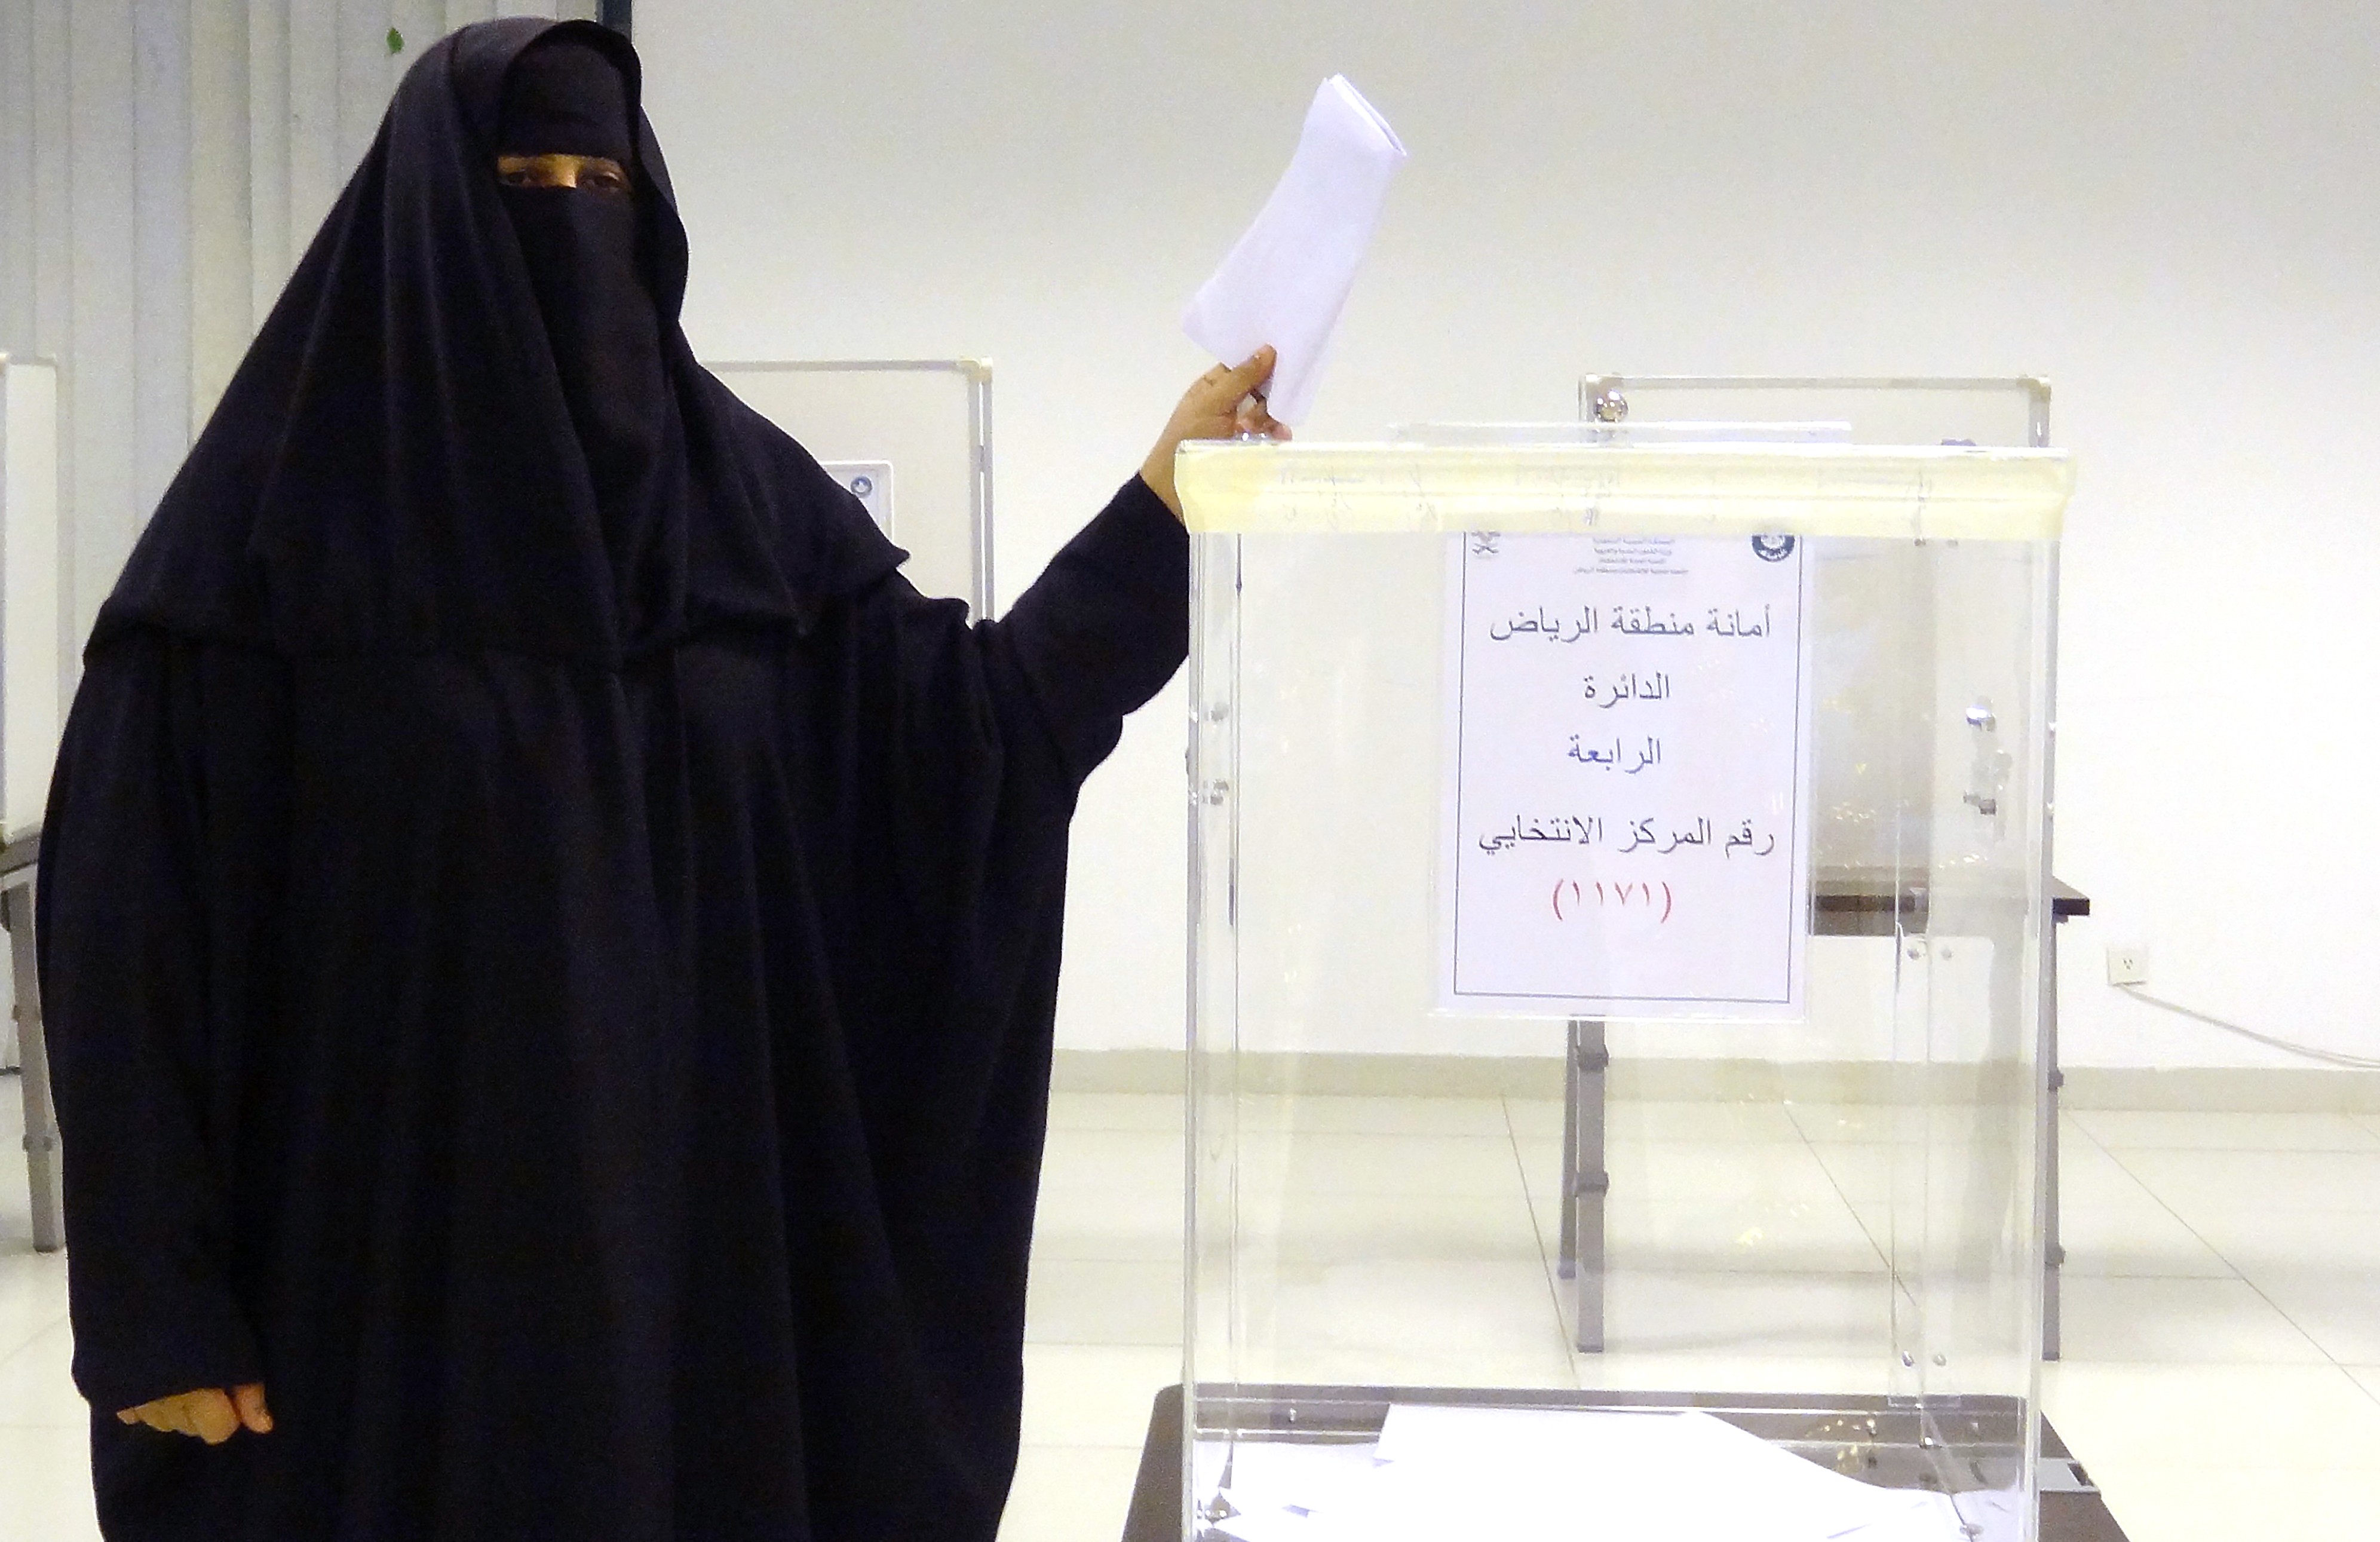 A Saudi woman casts her ballot in an election centre in the Saudi capital of Riyadh, on Dec.12, 2015. (Dina Fouad—AFP/Getty Images)